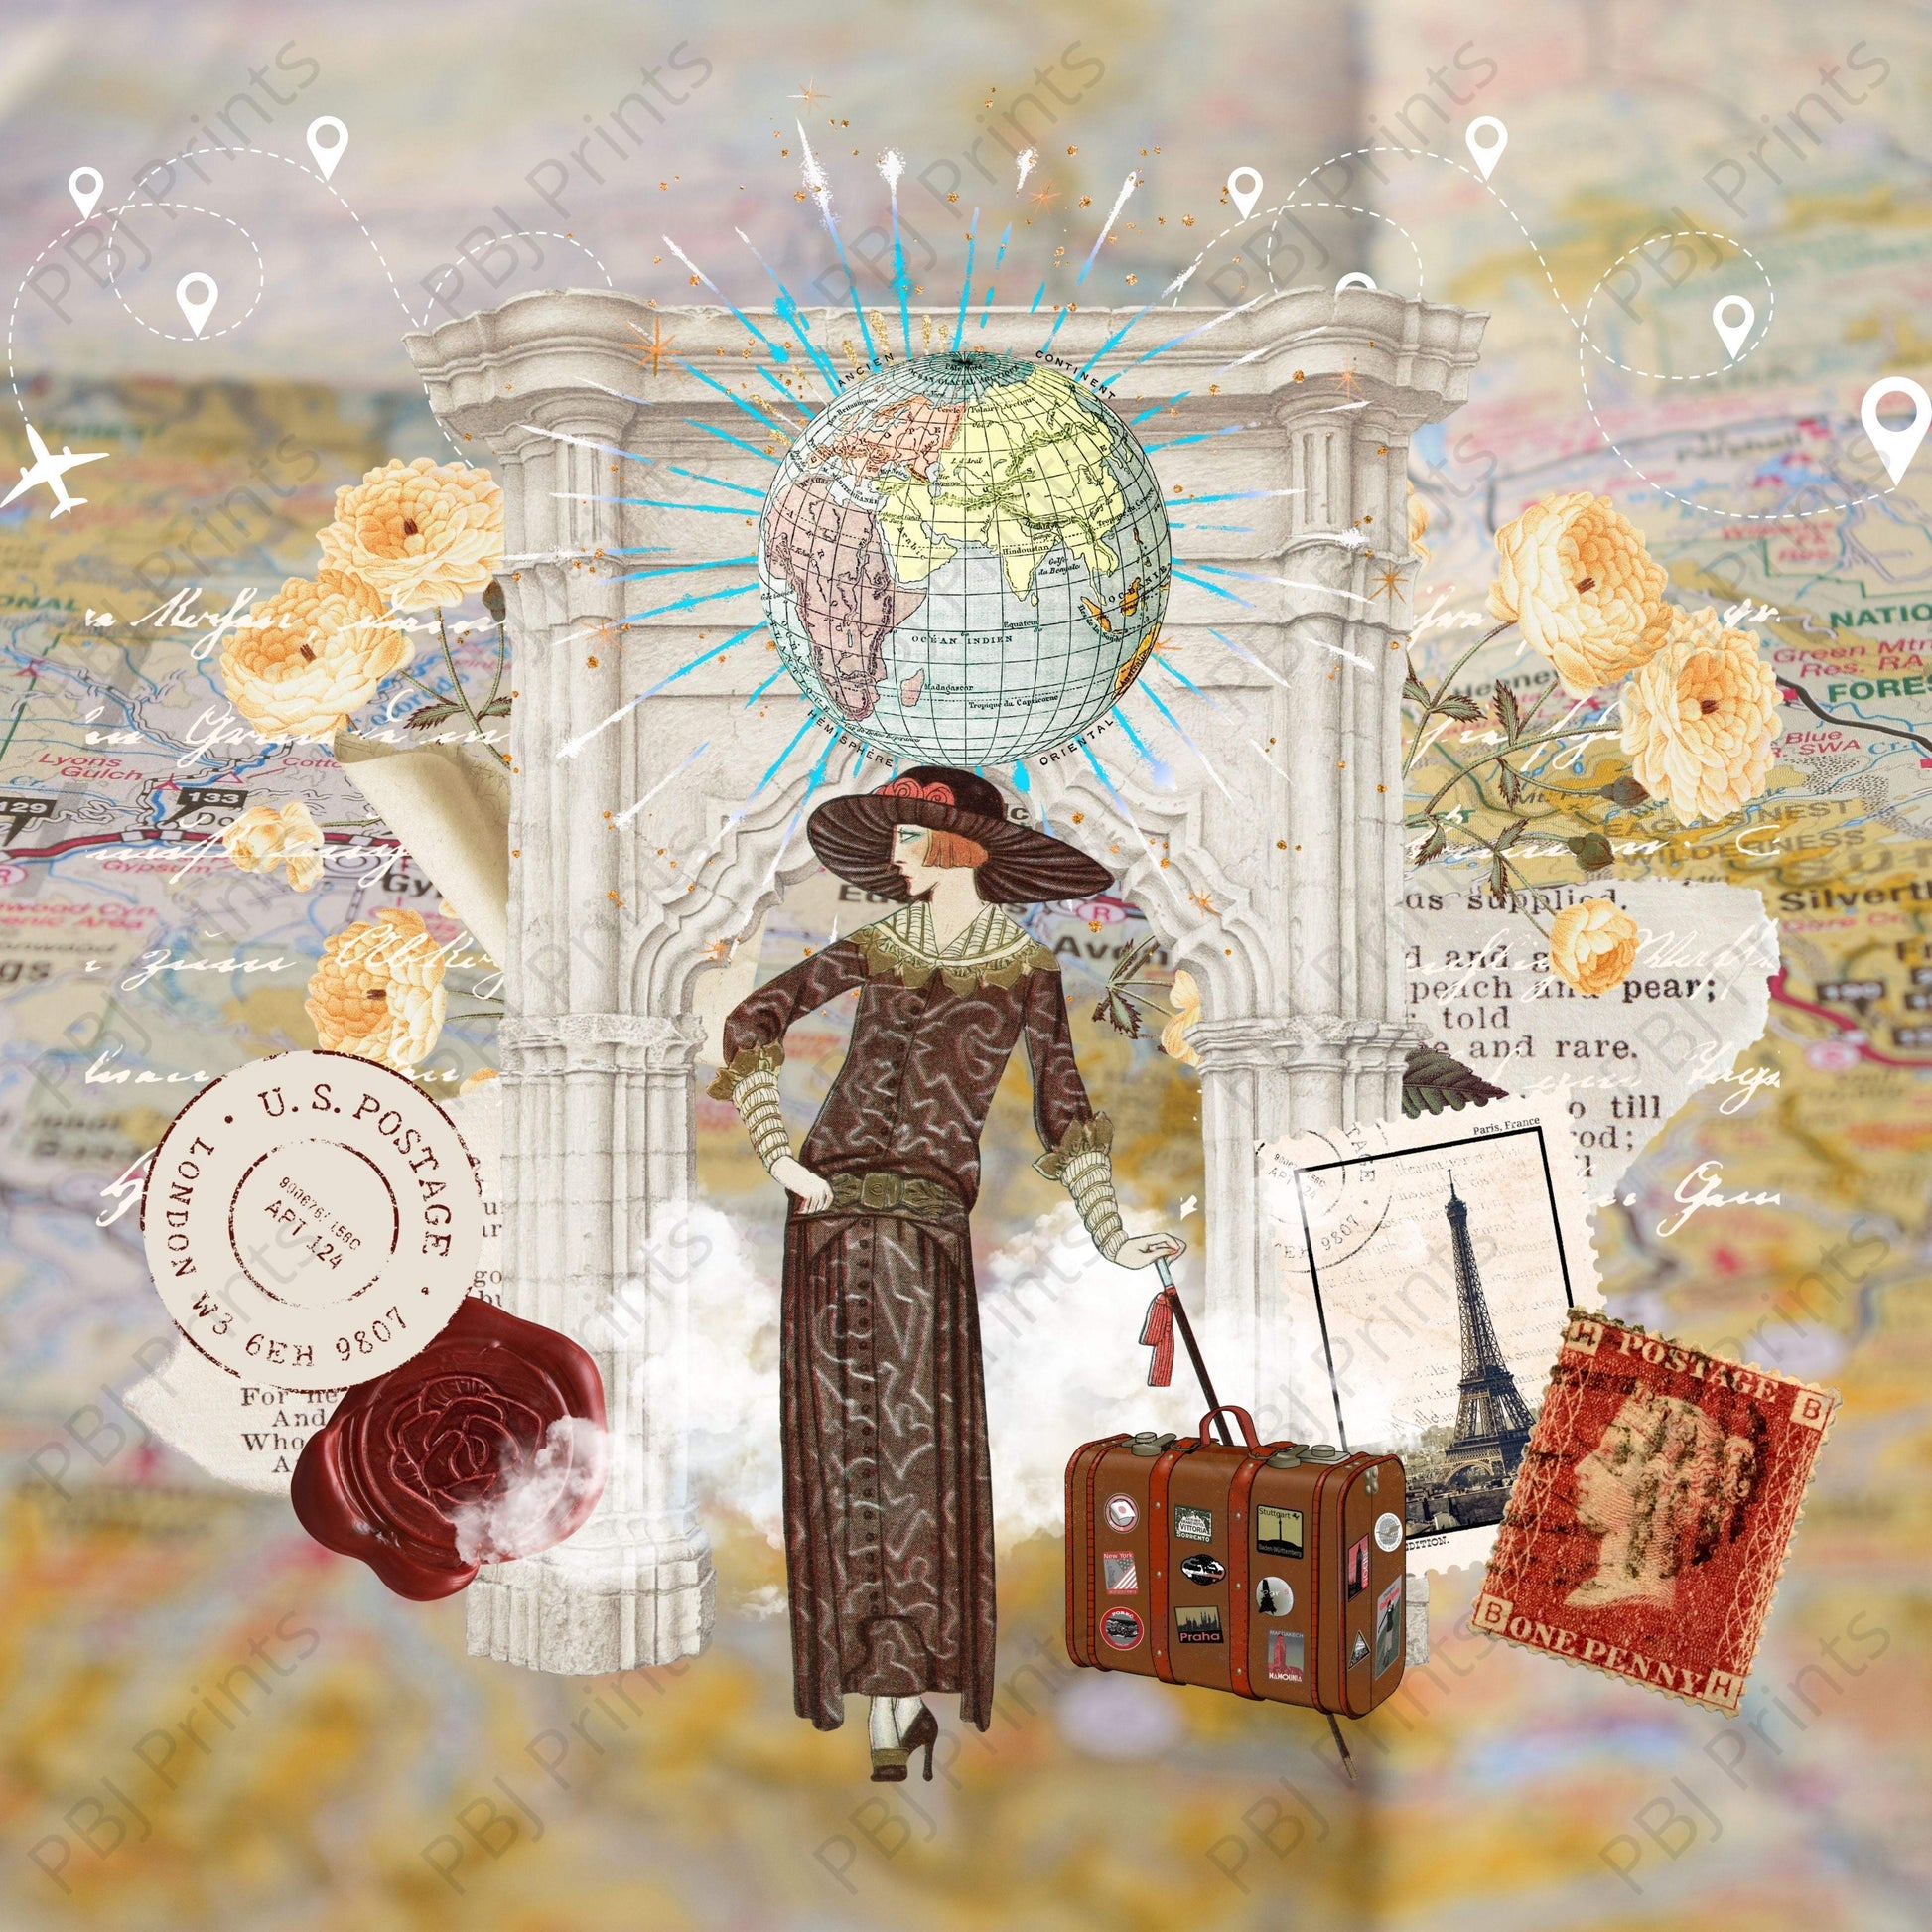 Lady of the World - Artist by Sarah Lopp - 